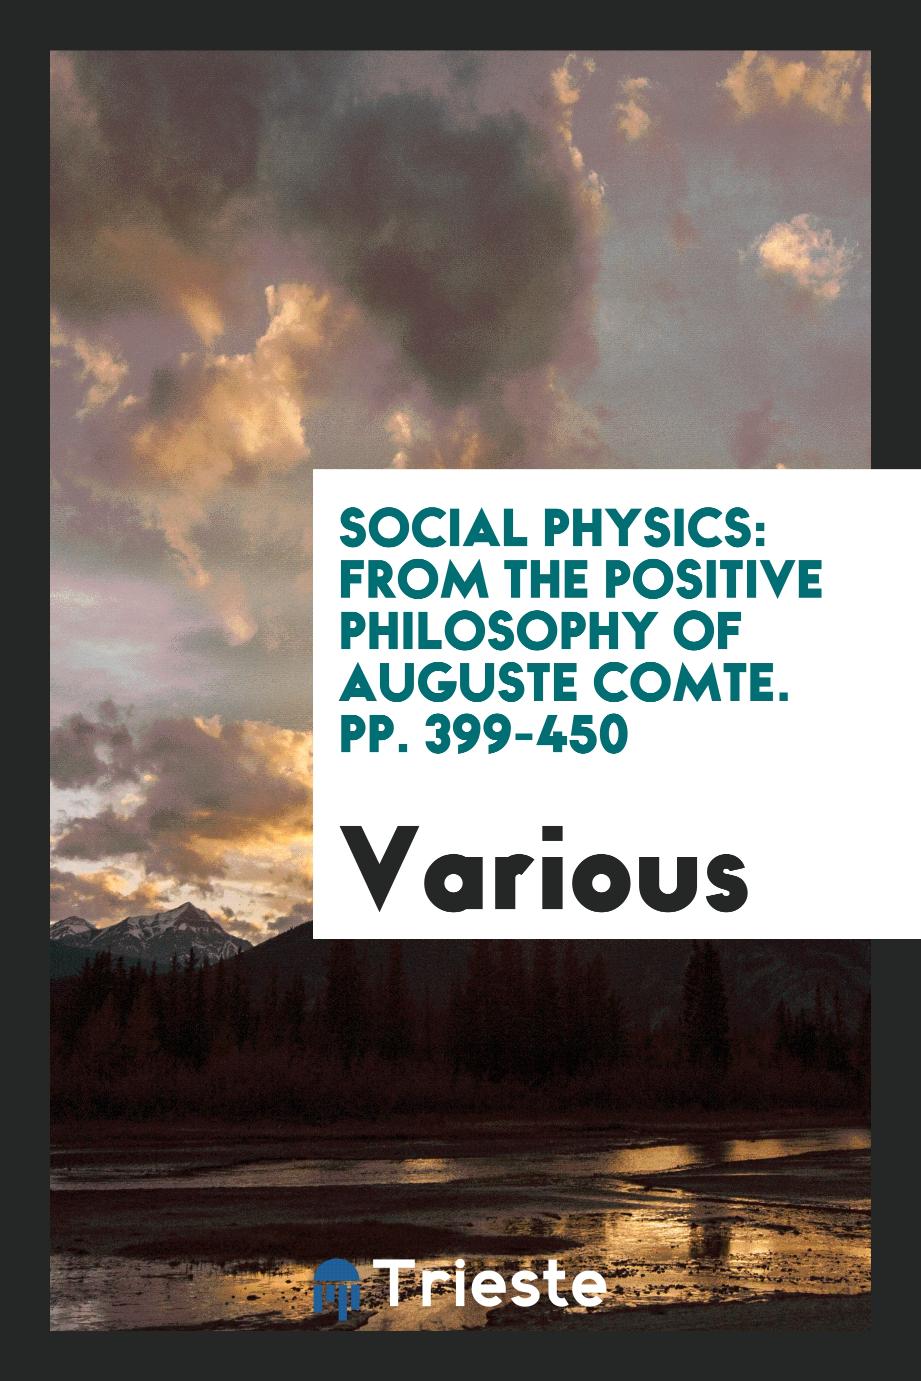 Social Physics: From the Positive Philosophy of Auguste Comte. pp. 399-450